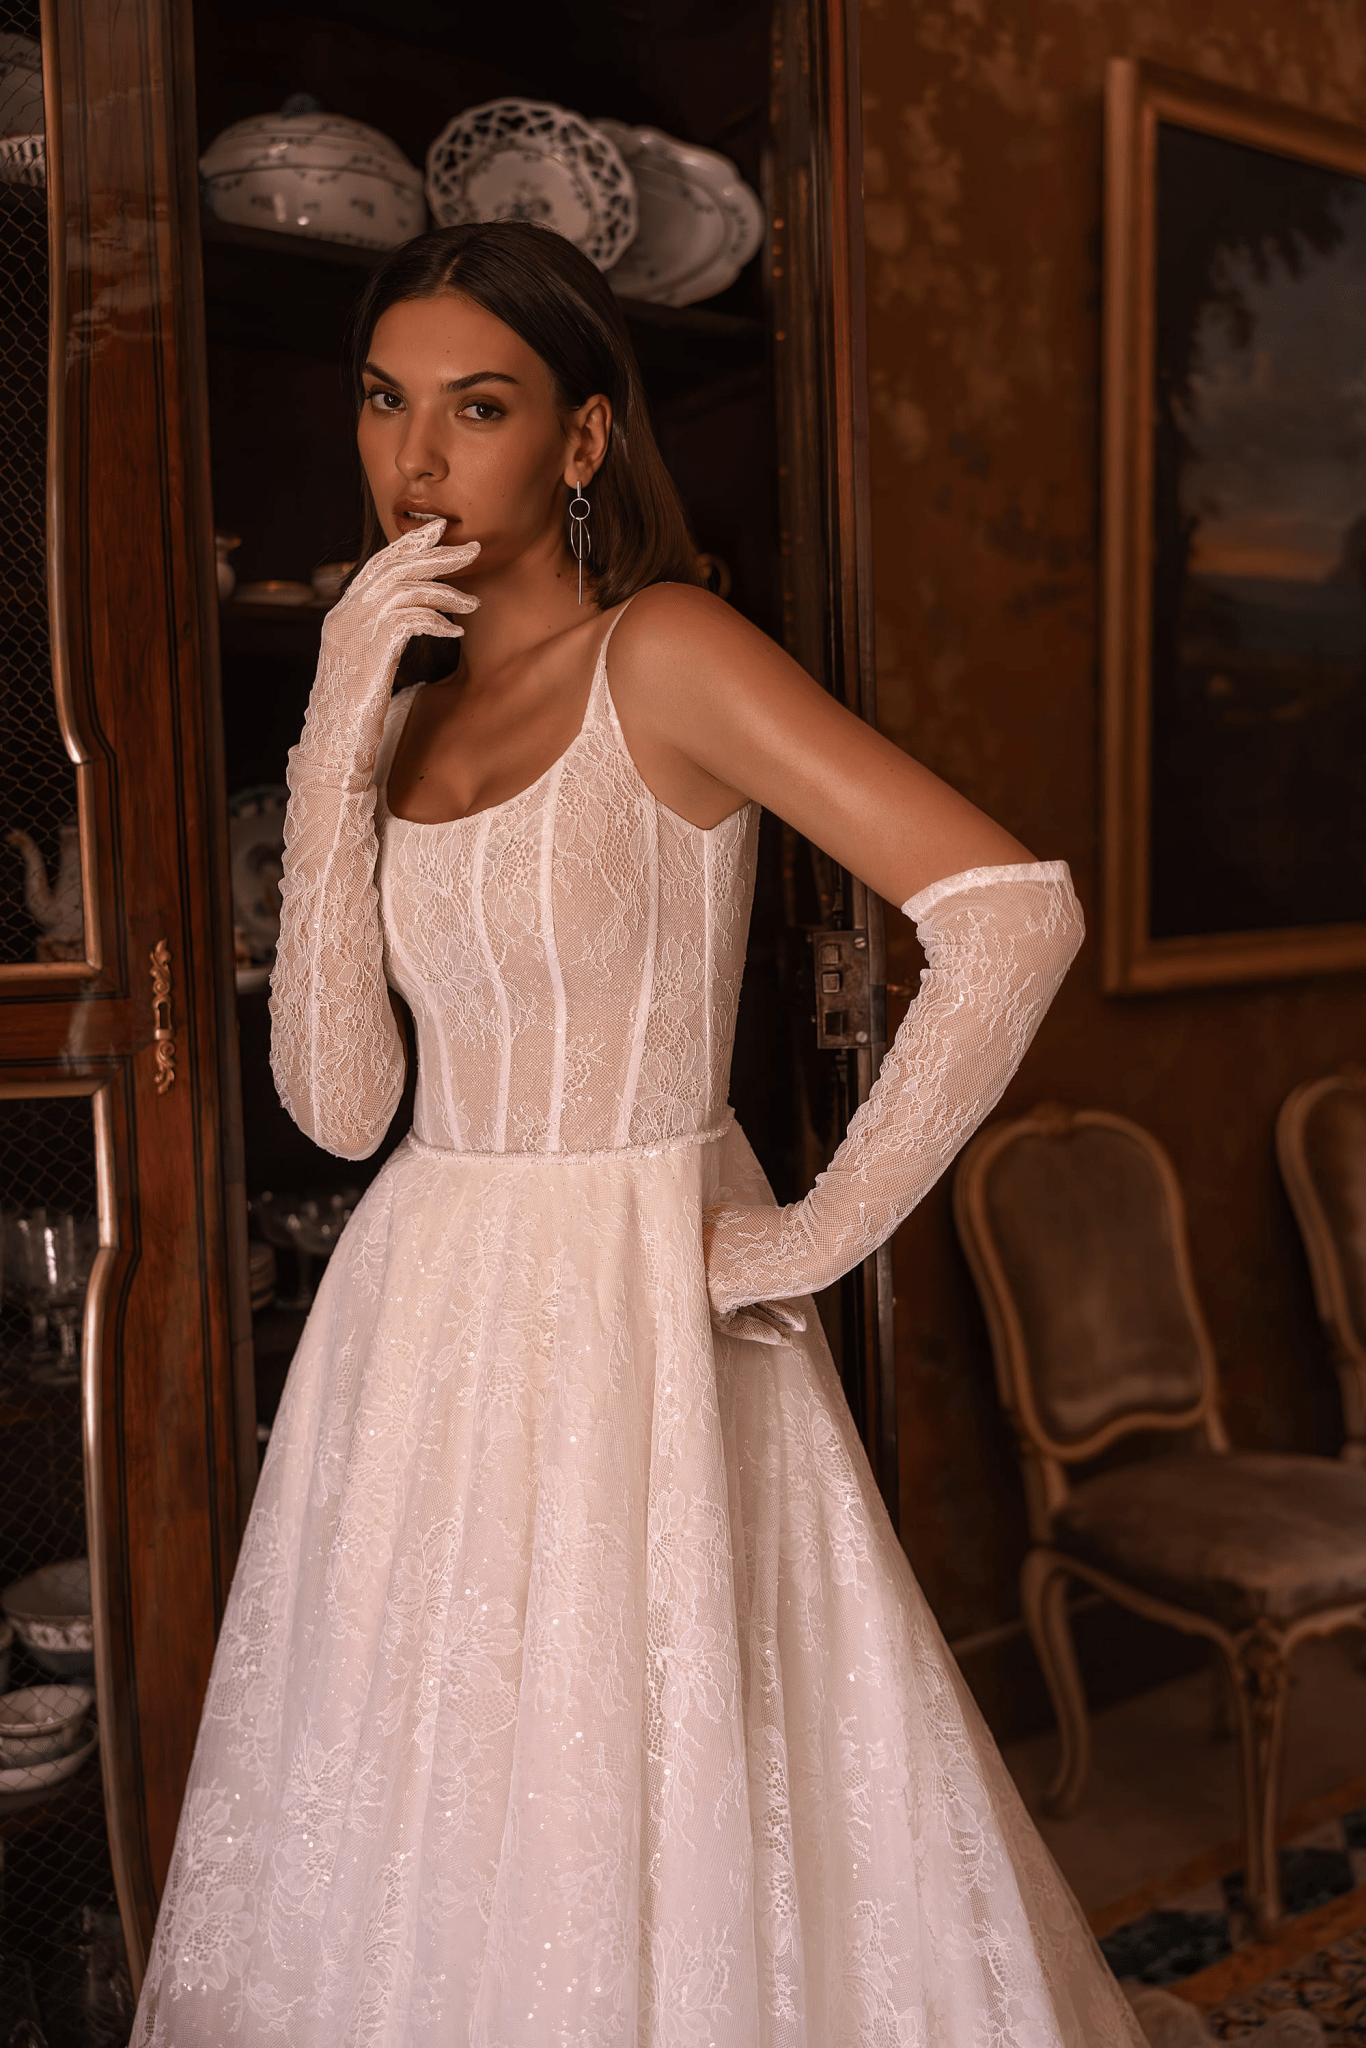 Elegant Lace Wedding Gown with Long Train and Matching Gloves - Wedding Dress with Straps and Lace Plus Size - WonderlandByLilian